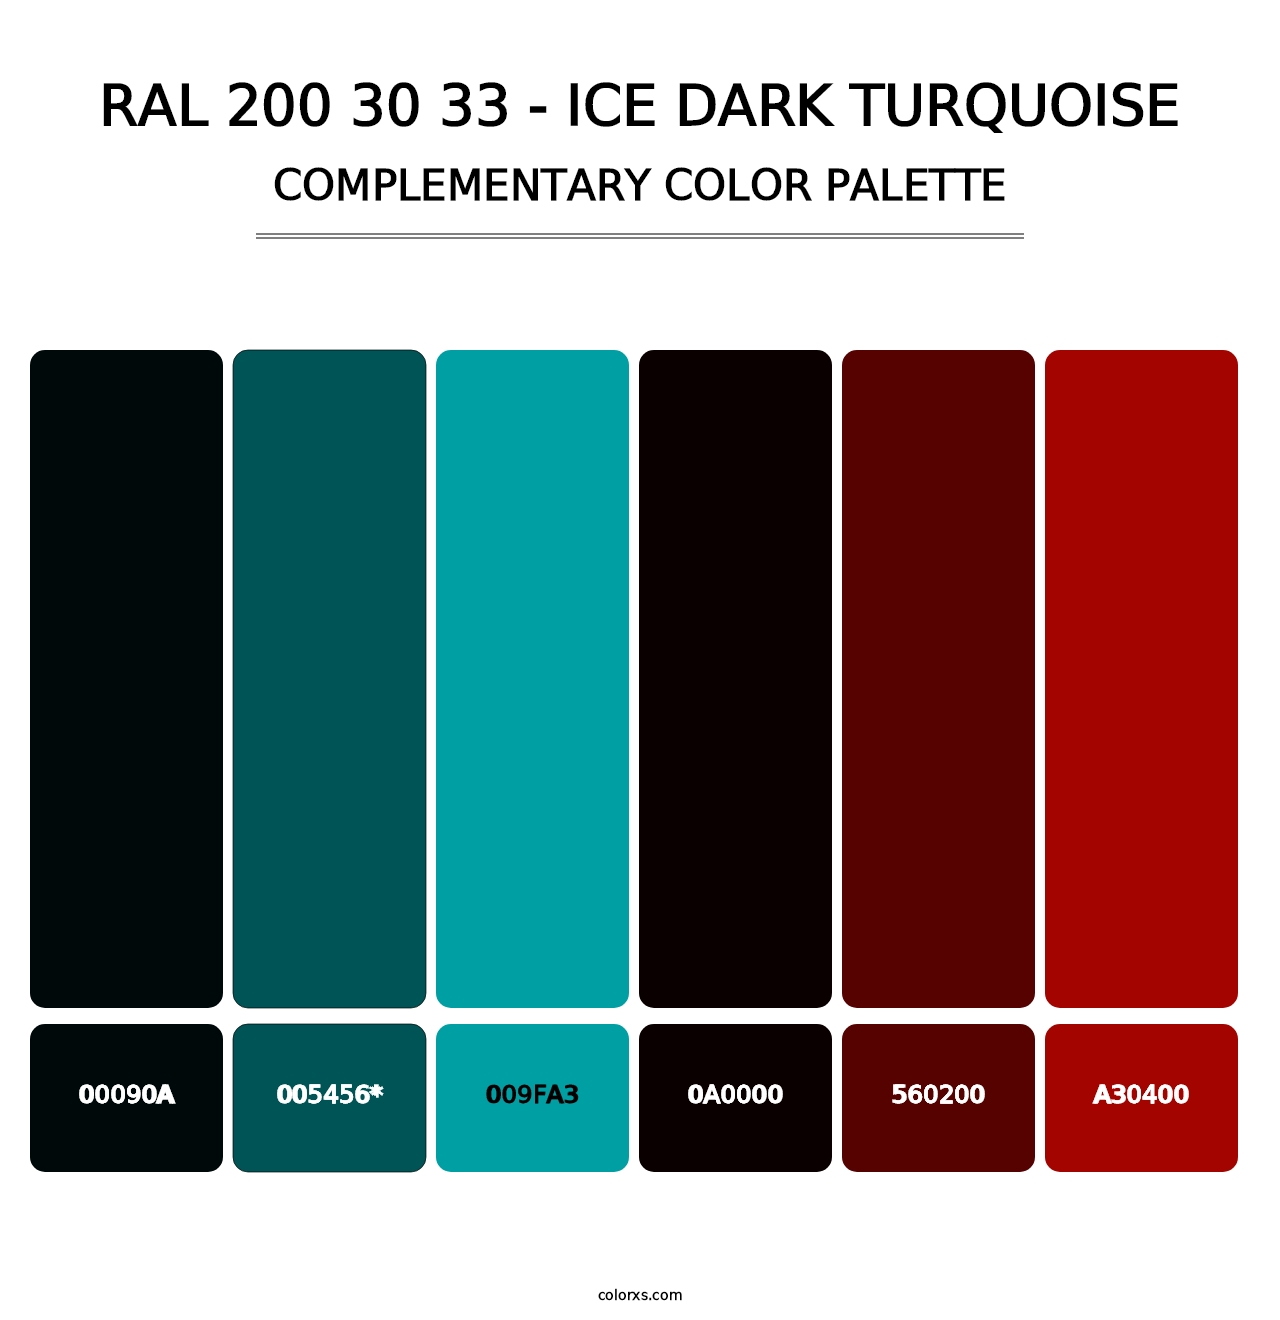 RAL 200 30 33 - Ice Dark Turquoise - Complementary Color Palette